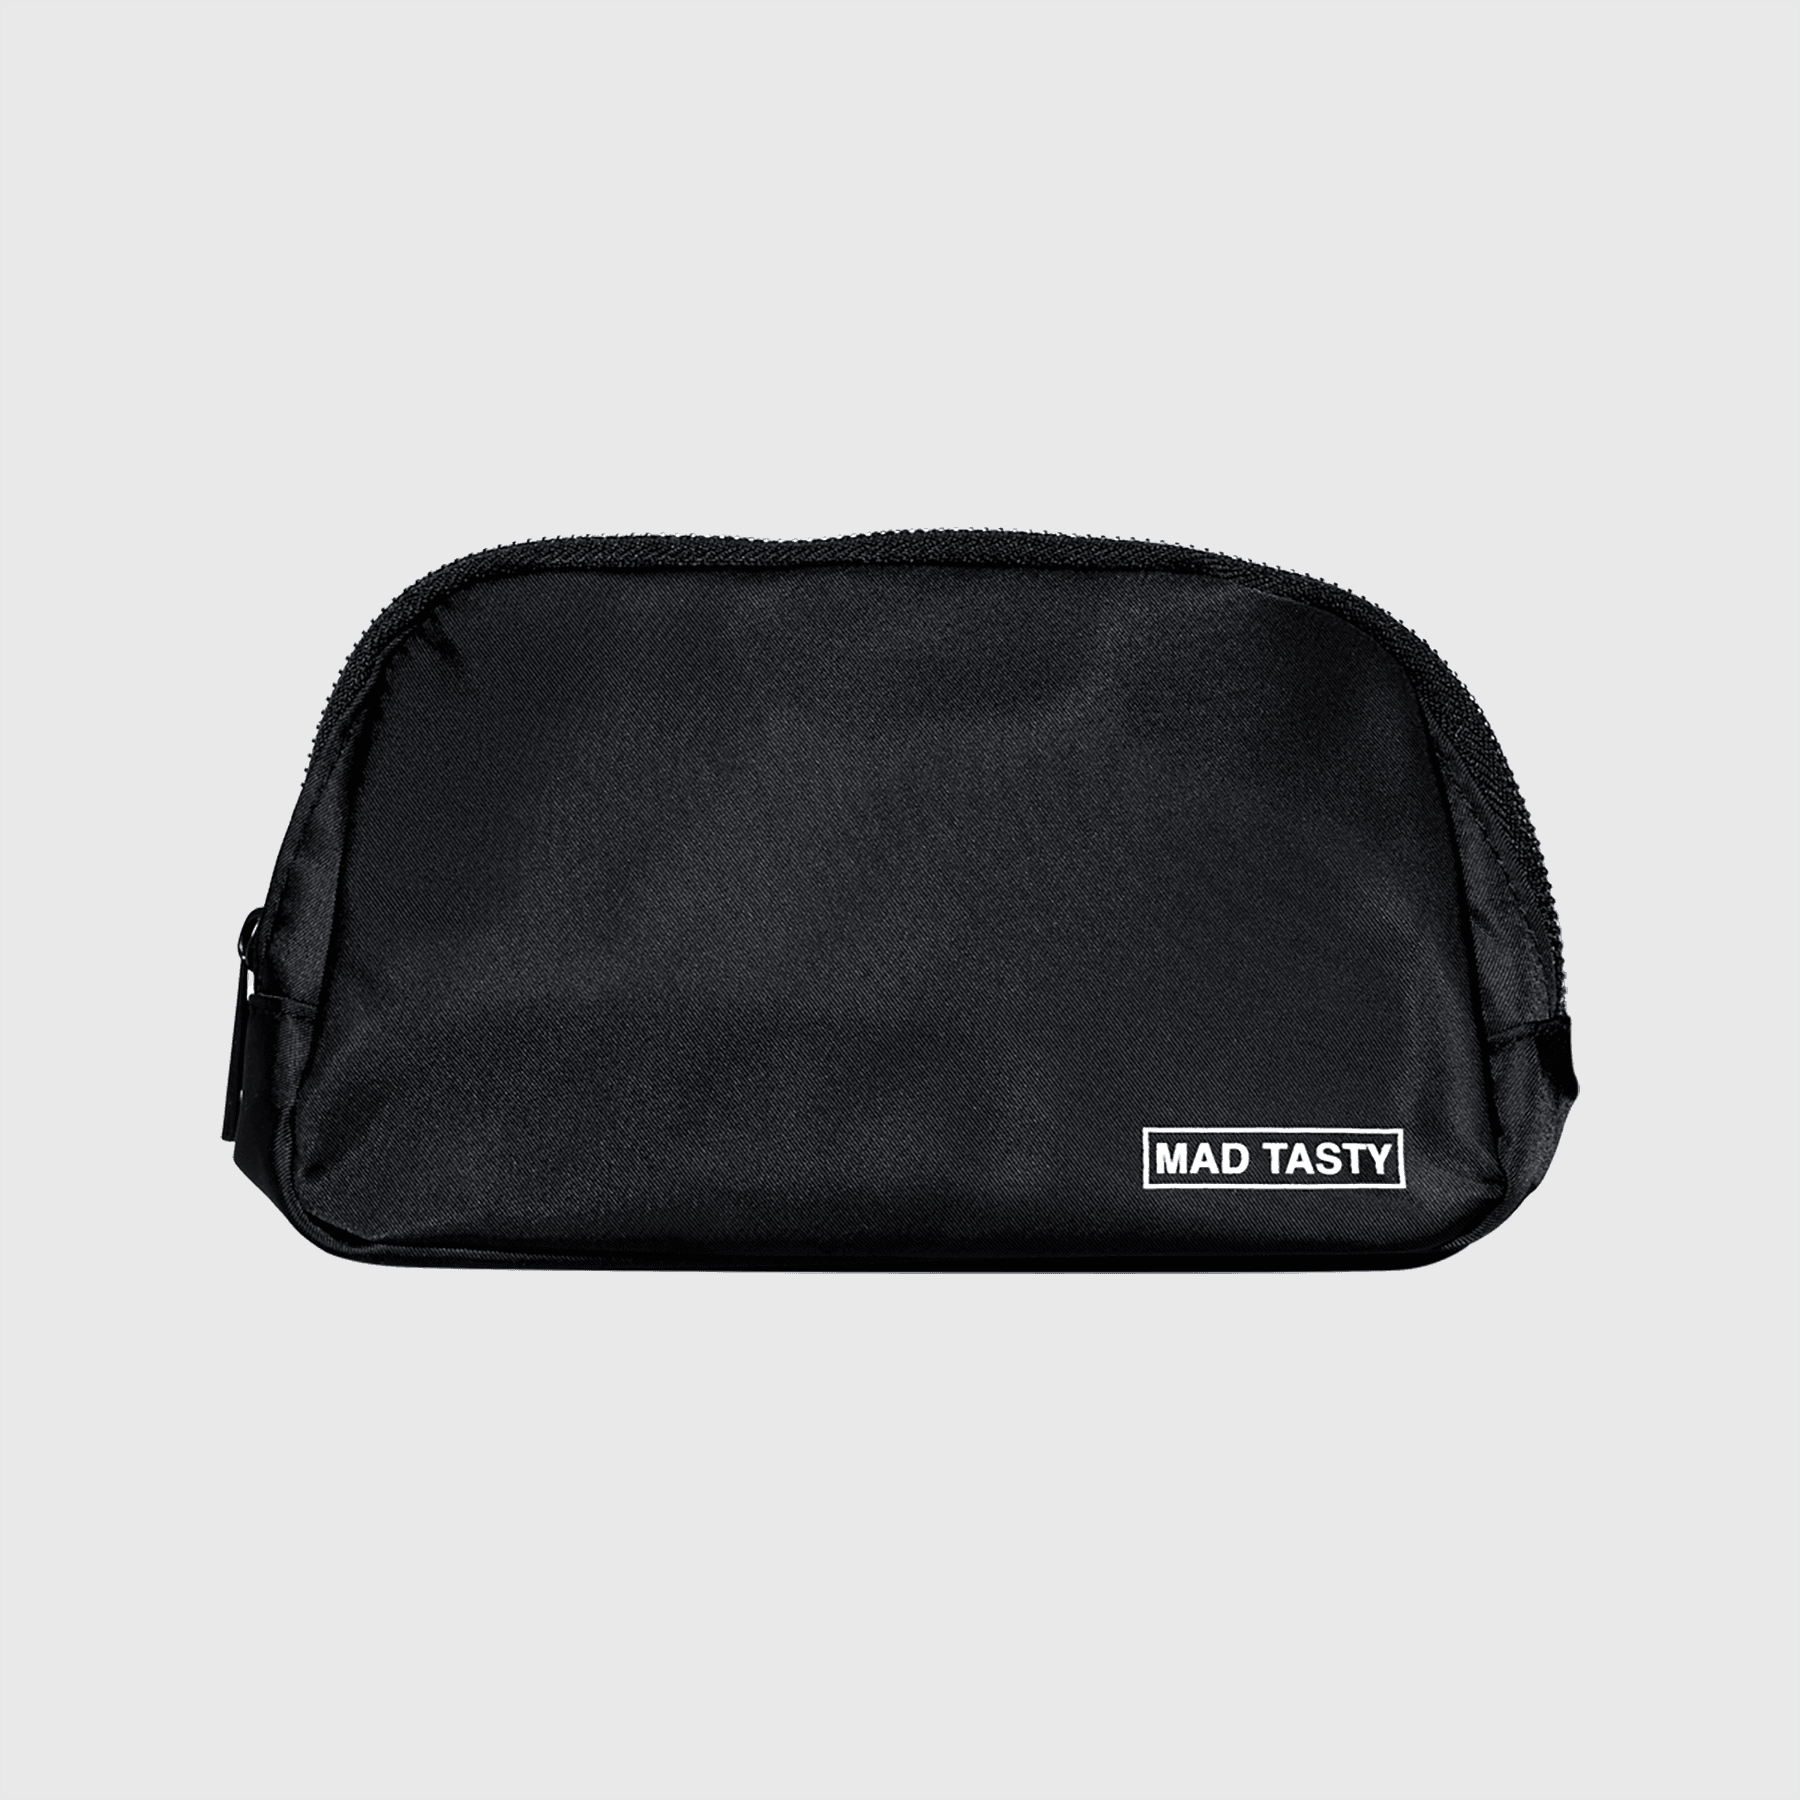 MAD TASTY custom black fanny pack with adjustable strap, zipper closer, outside and inside pockets. MAD TASTY logo on front and straps, with squiggles on inside liner.